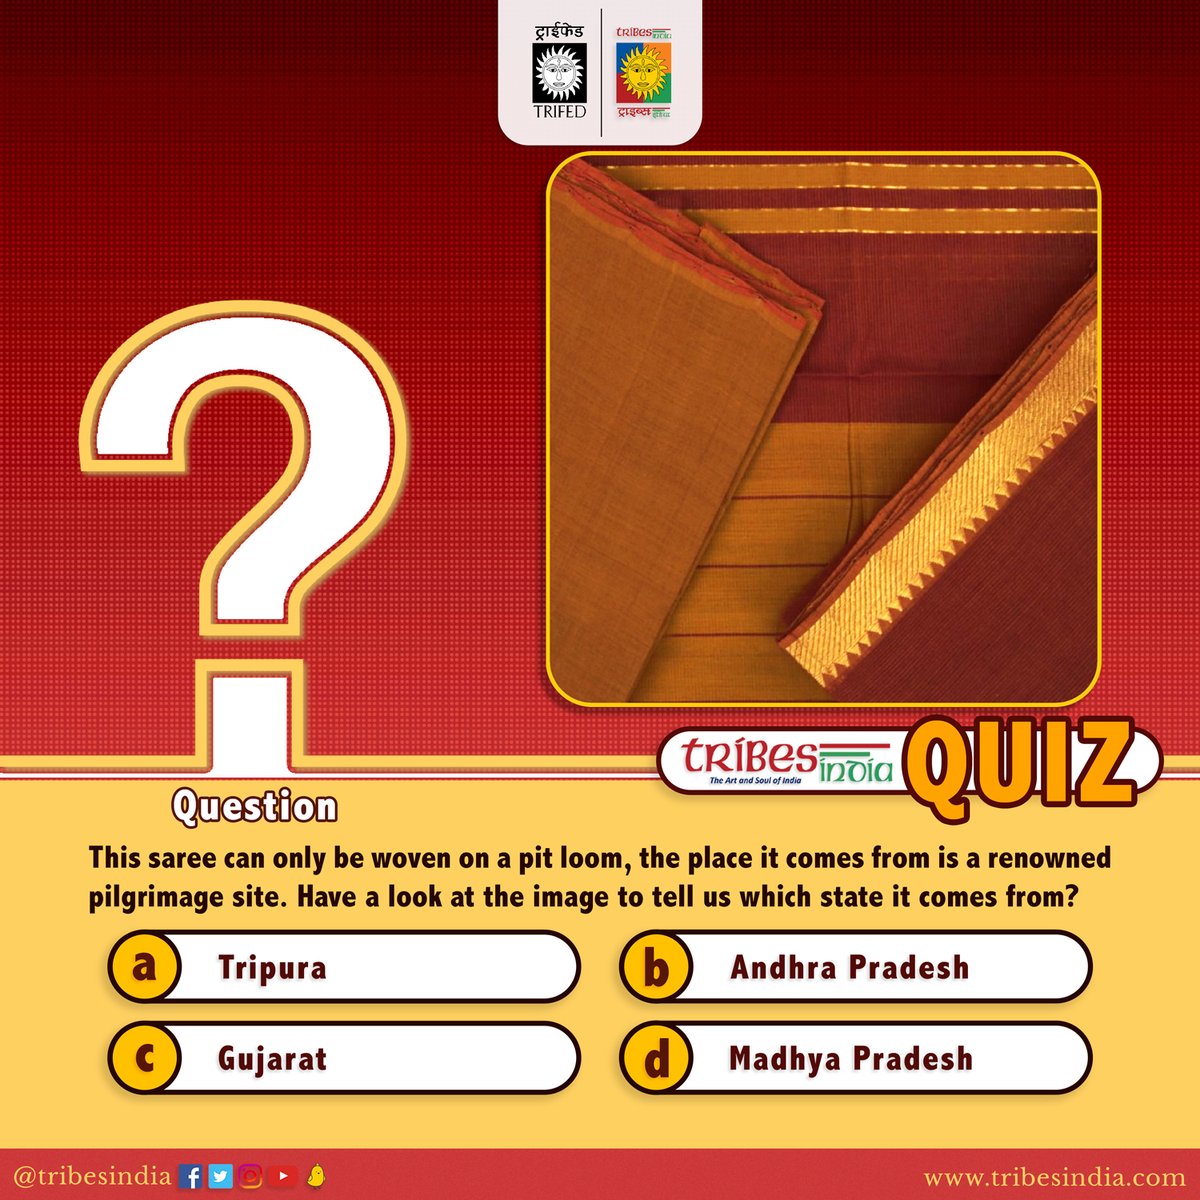 This saree can only be woven on a pit loom, the place it comes from is a renowned pilgrimage site. Have a look at the image to tell us which state it comes from? a)Tripura b)Andhra Pradesh c)Gujarat d)Madhya Pradesh Please respond with the correct option👇. #BuyTribal #QuizTime